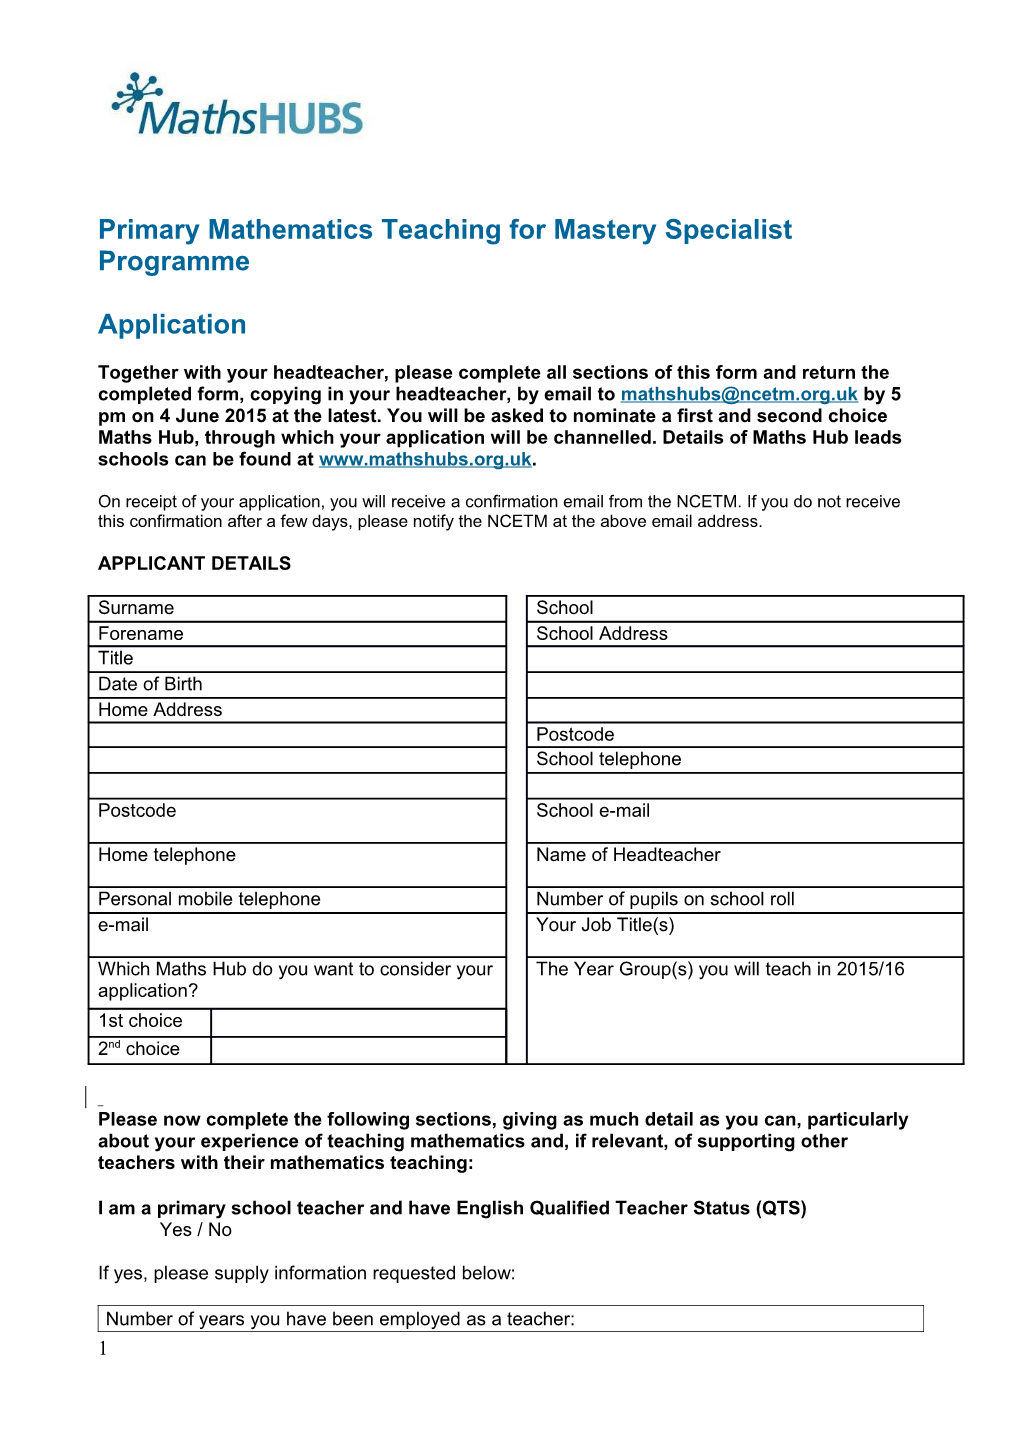 Primary Mathematics Teaching for Mastery Specialist Programme